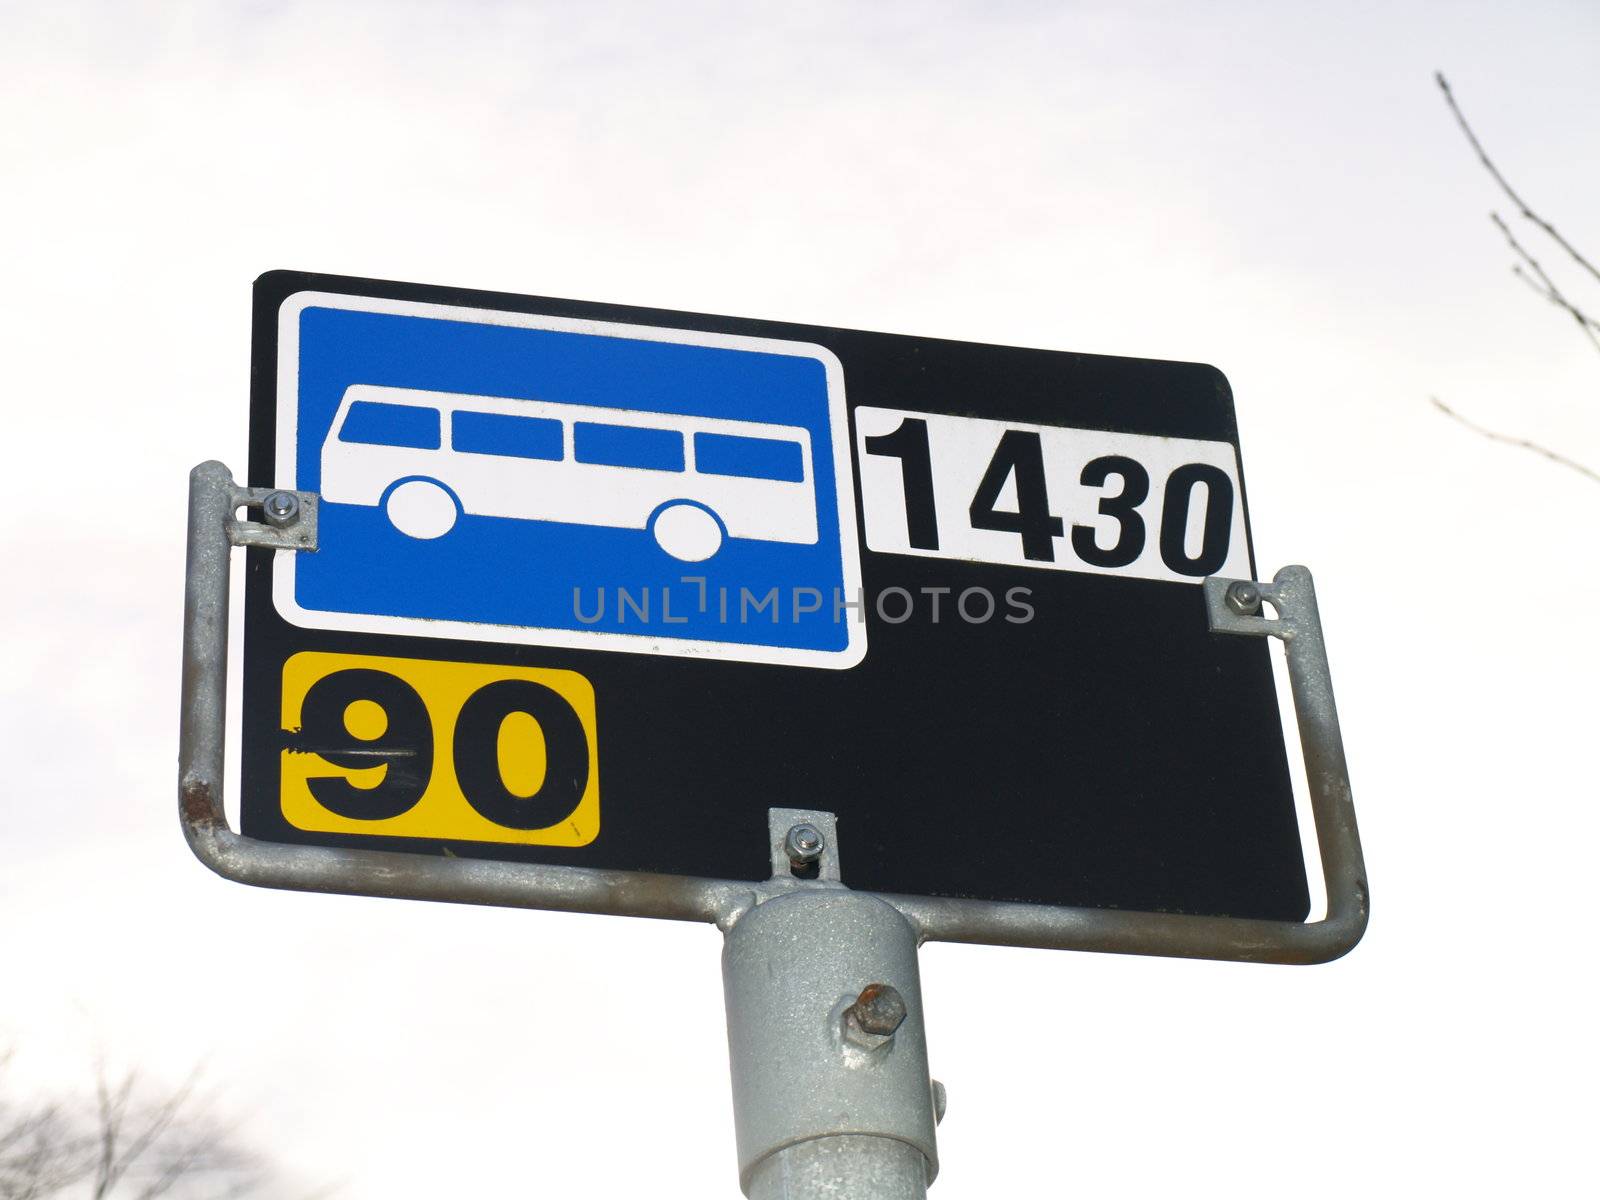 bus stop sign